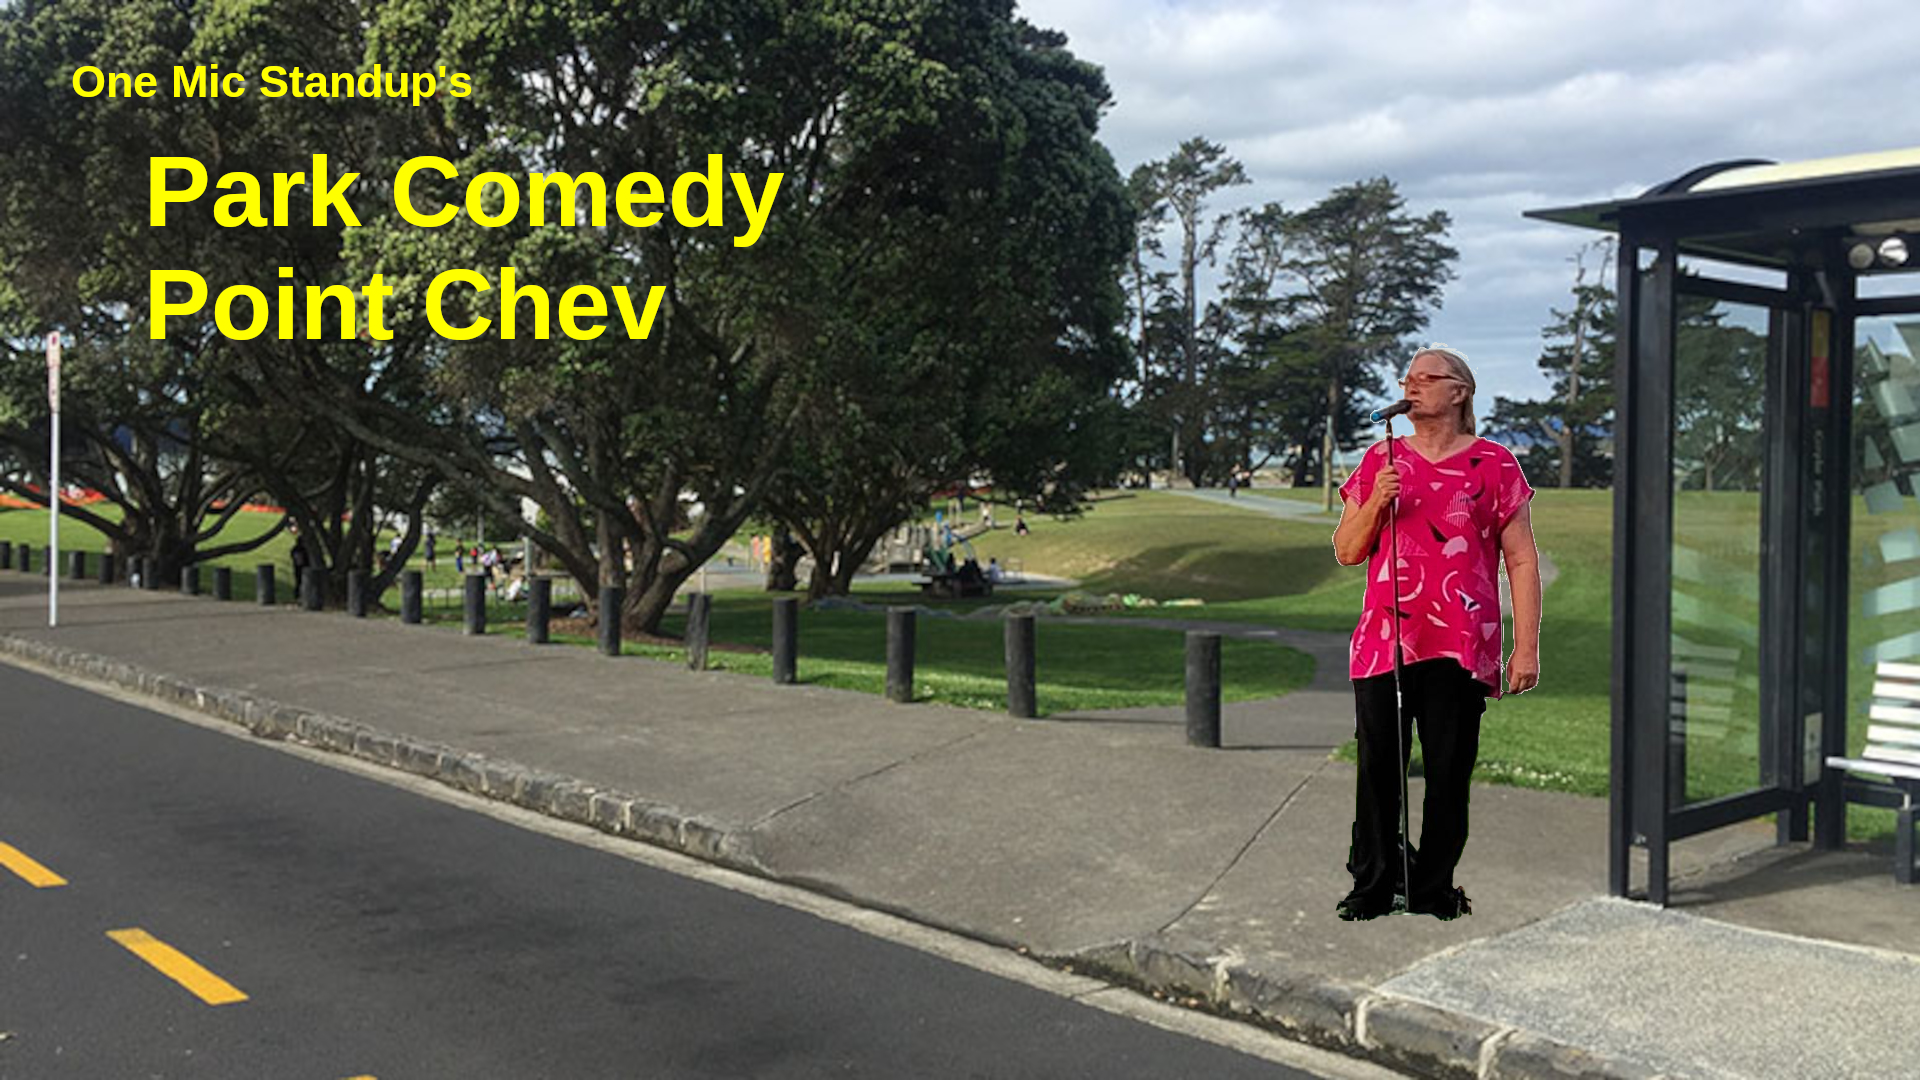 A comedian with microphone stands on the footpath by a large park